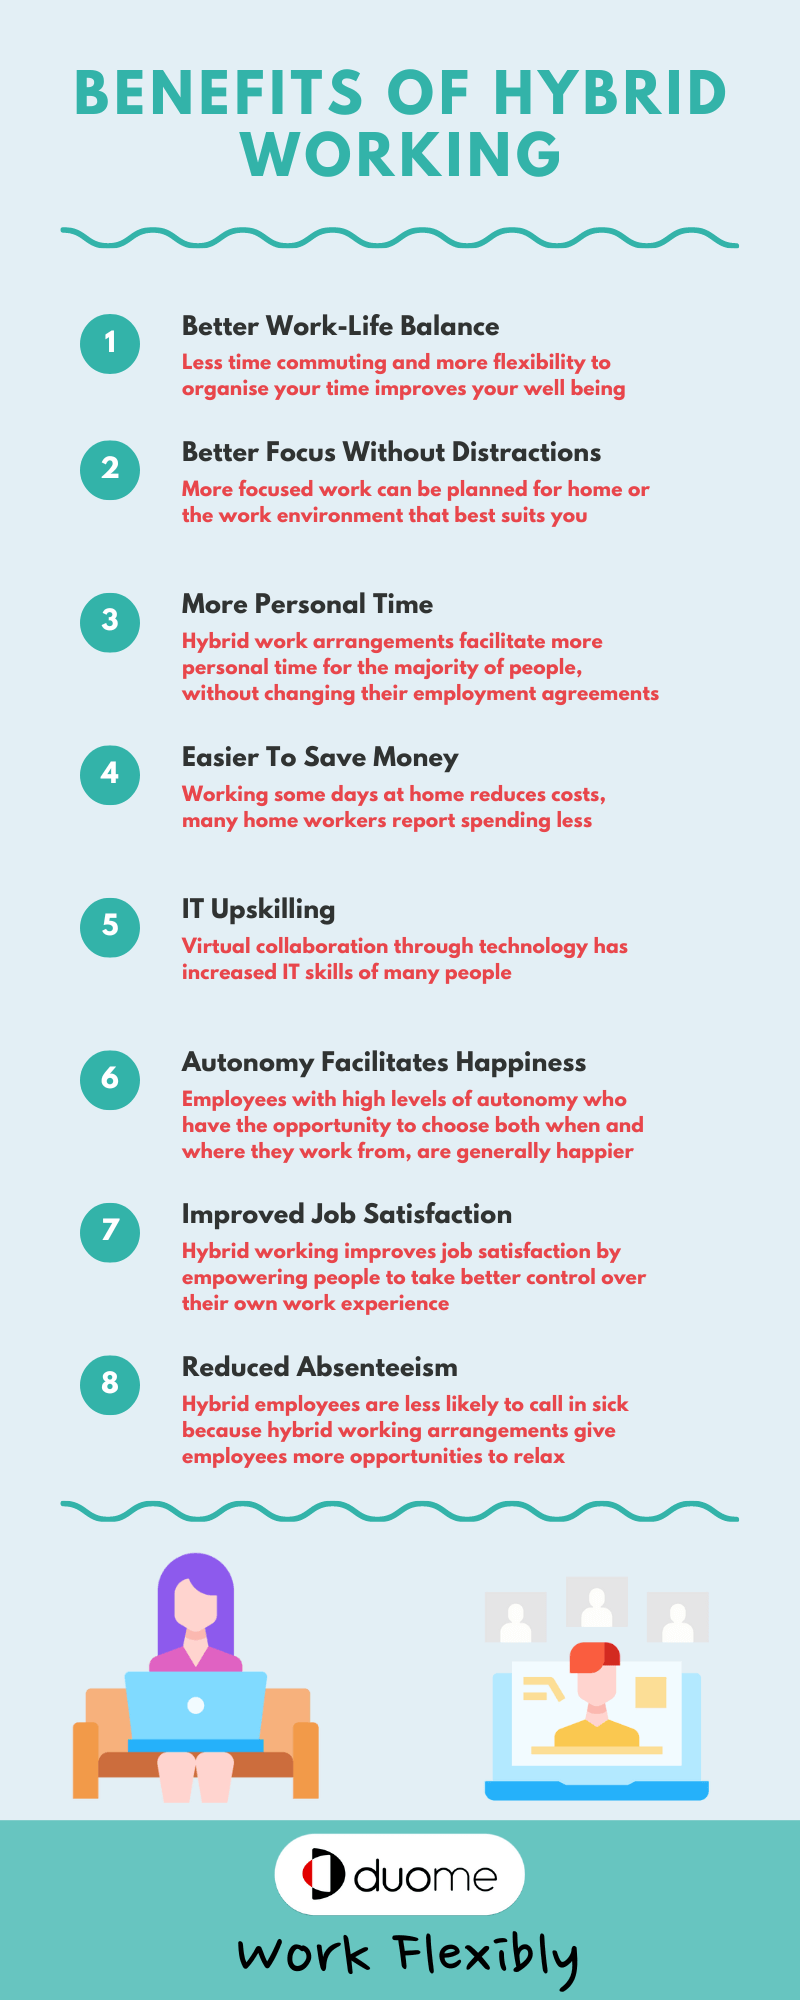 8 Benefits of hybrid working infographic